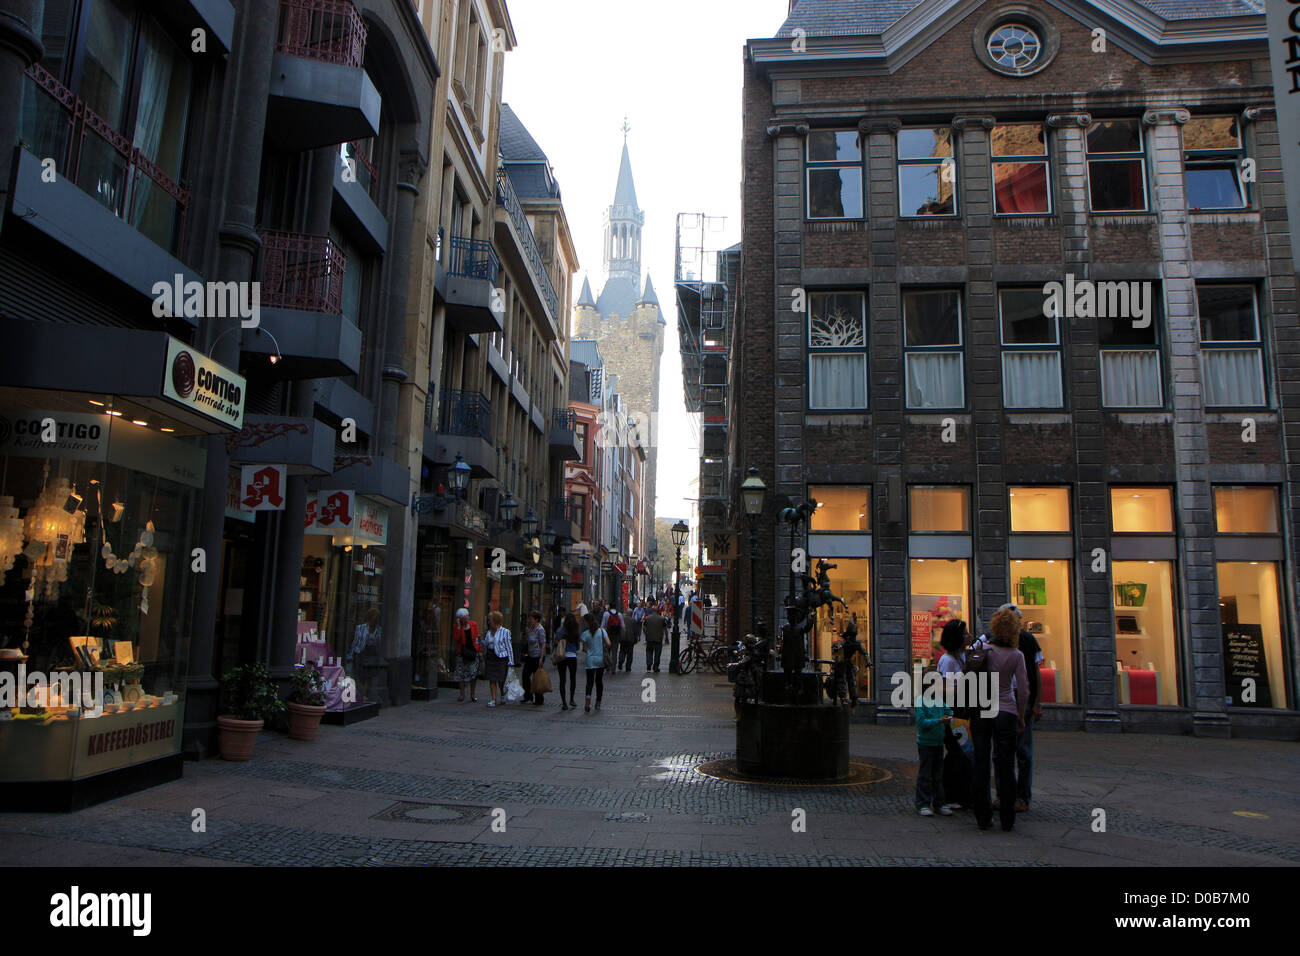 Typical street in Aachen, Germany, Europe Stock Photo